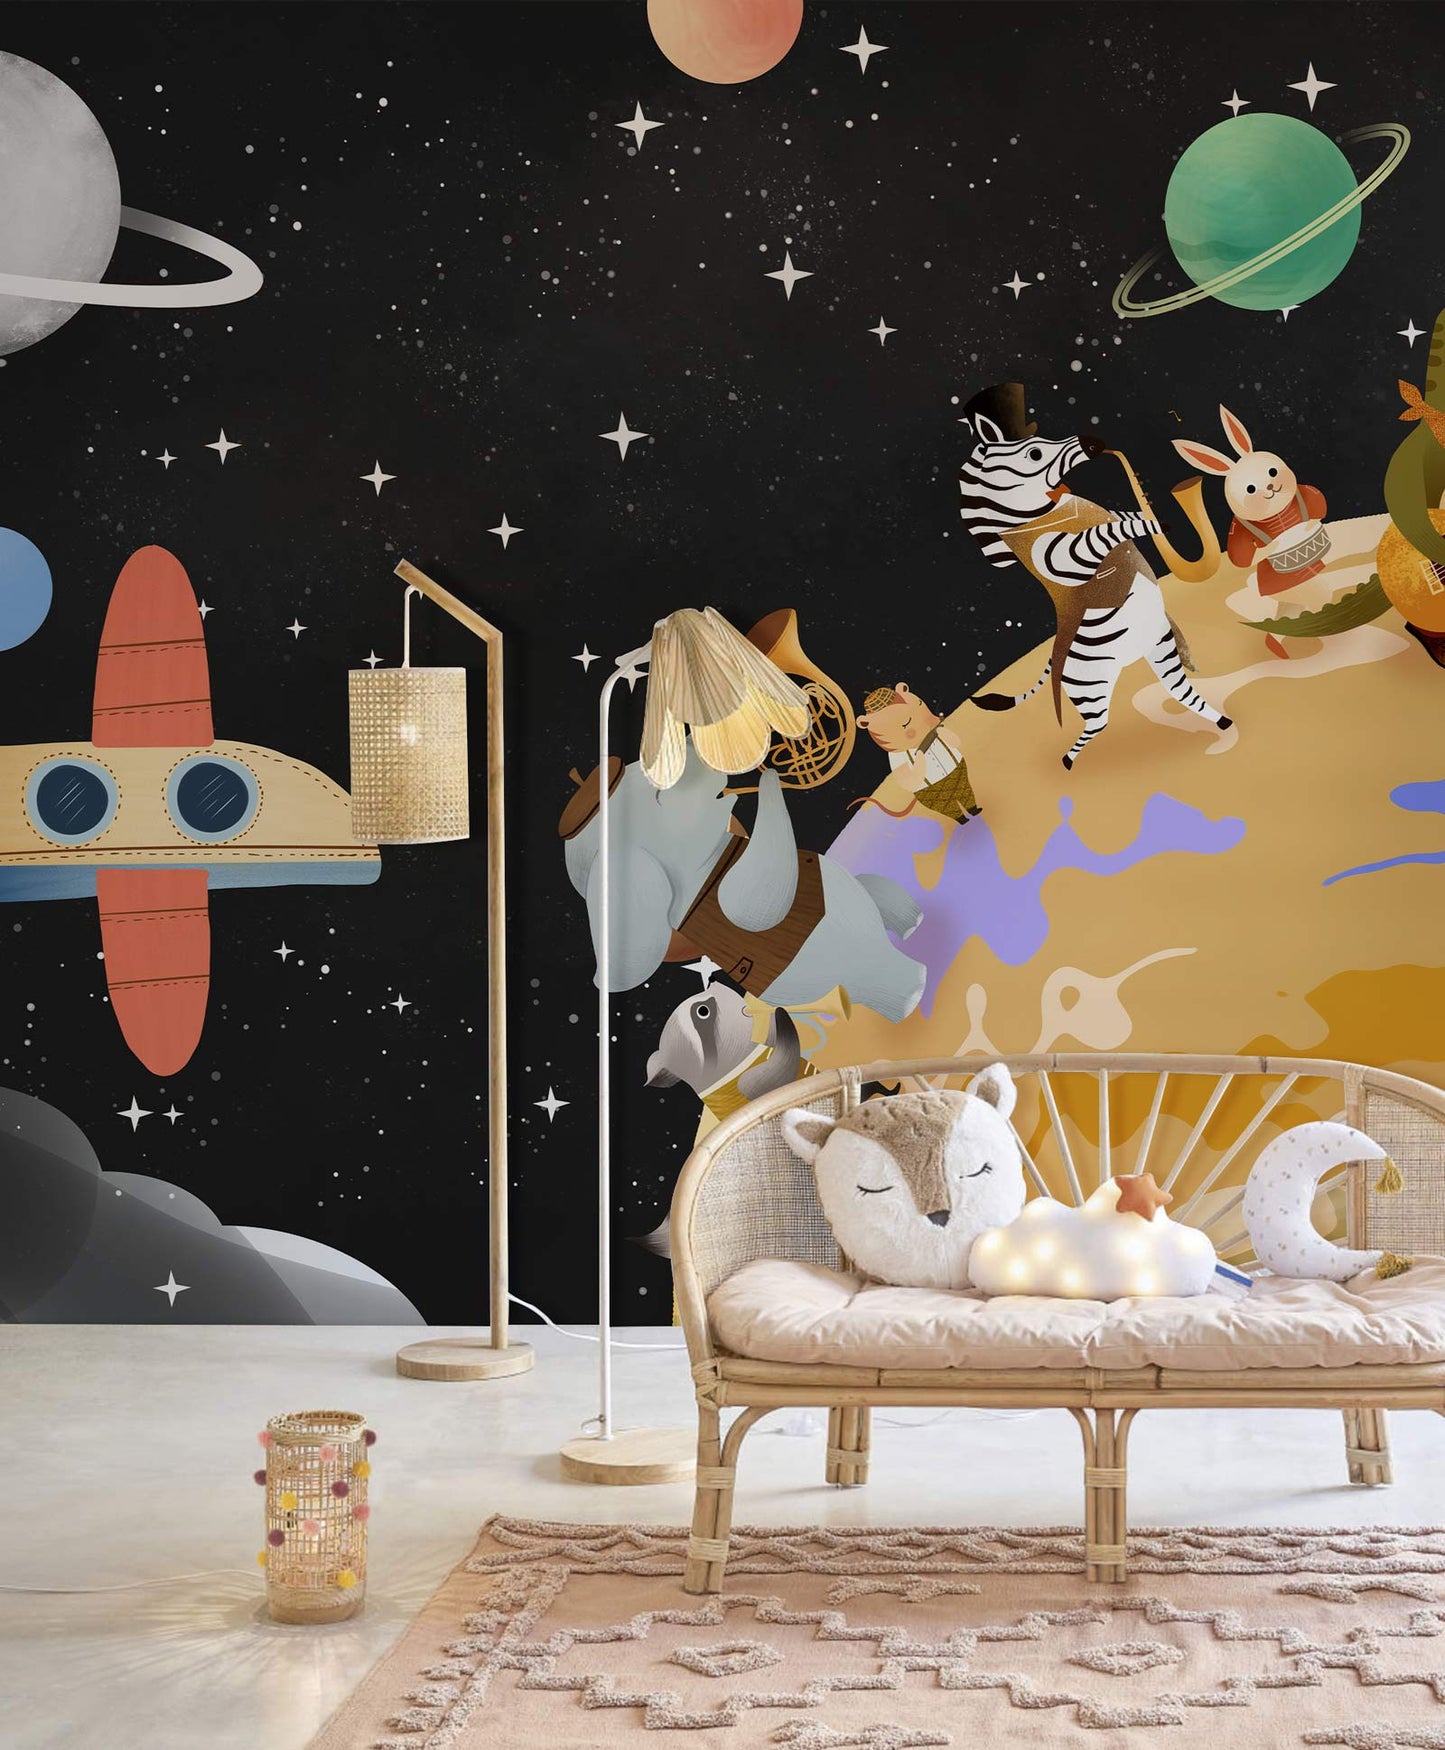 Kids' Room Wallpaper Mural Featuring the Cosmos and Its Animal Residents